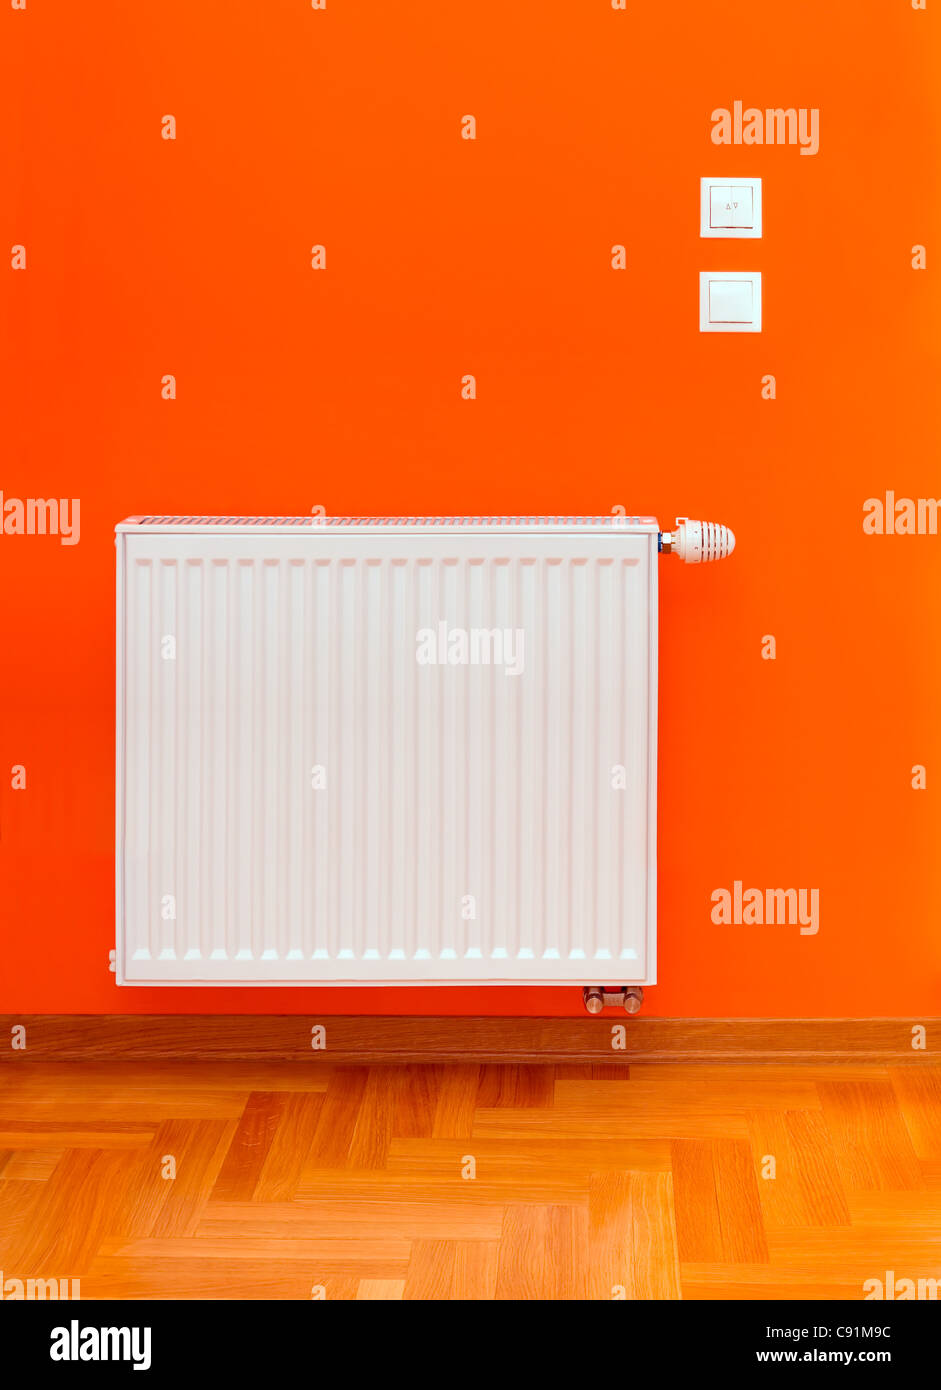 Radiator heater attached on the orange wall Stock Photo